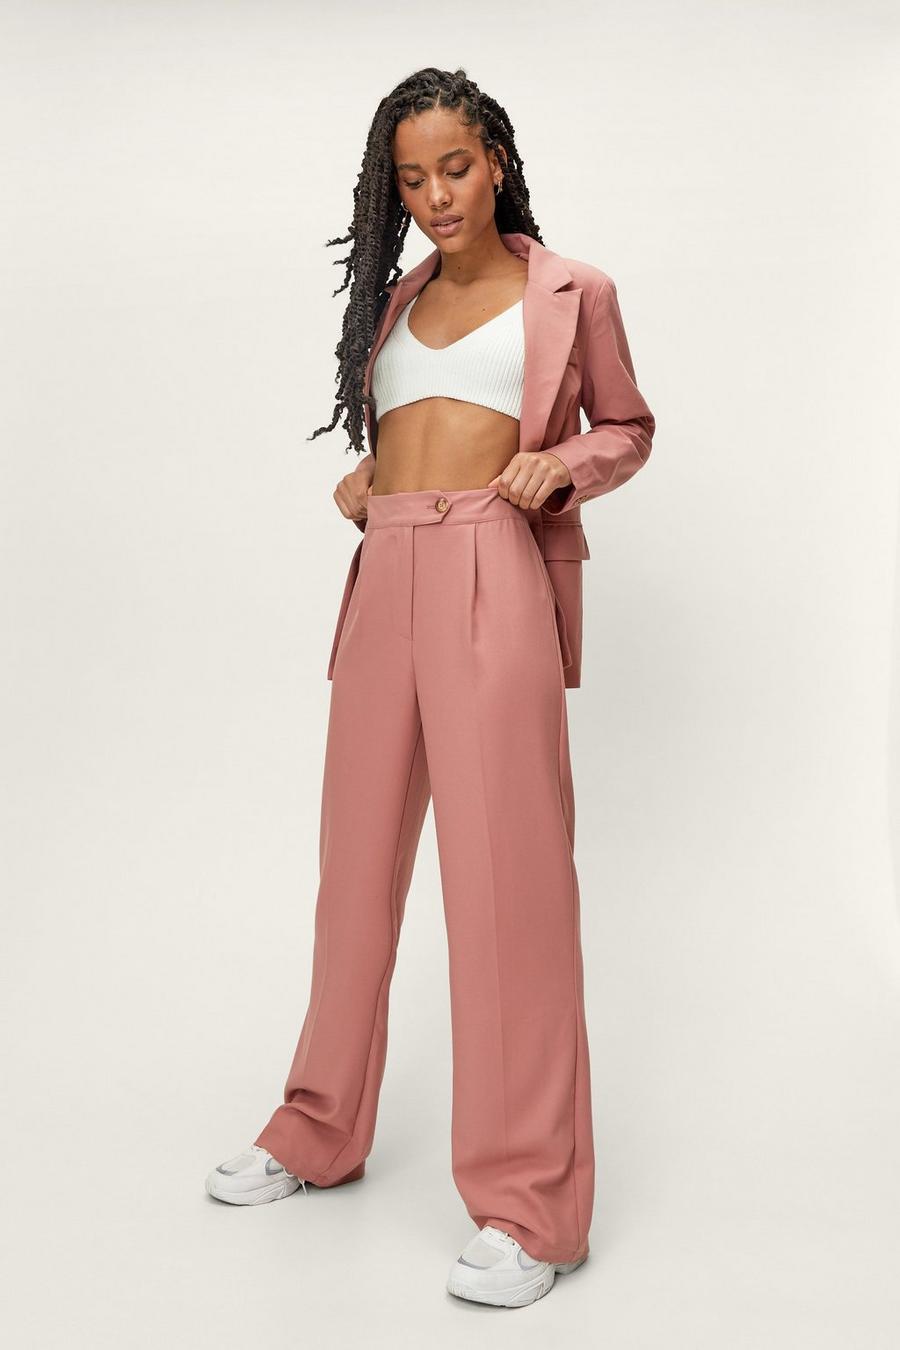 Ruched Pant Set/Matching pant and top set, Women's casual wear –  DivineSelection.USA